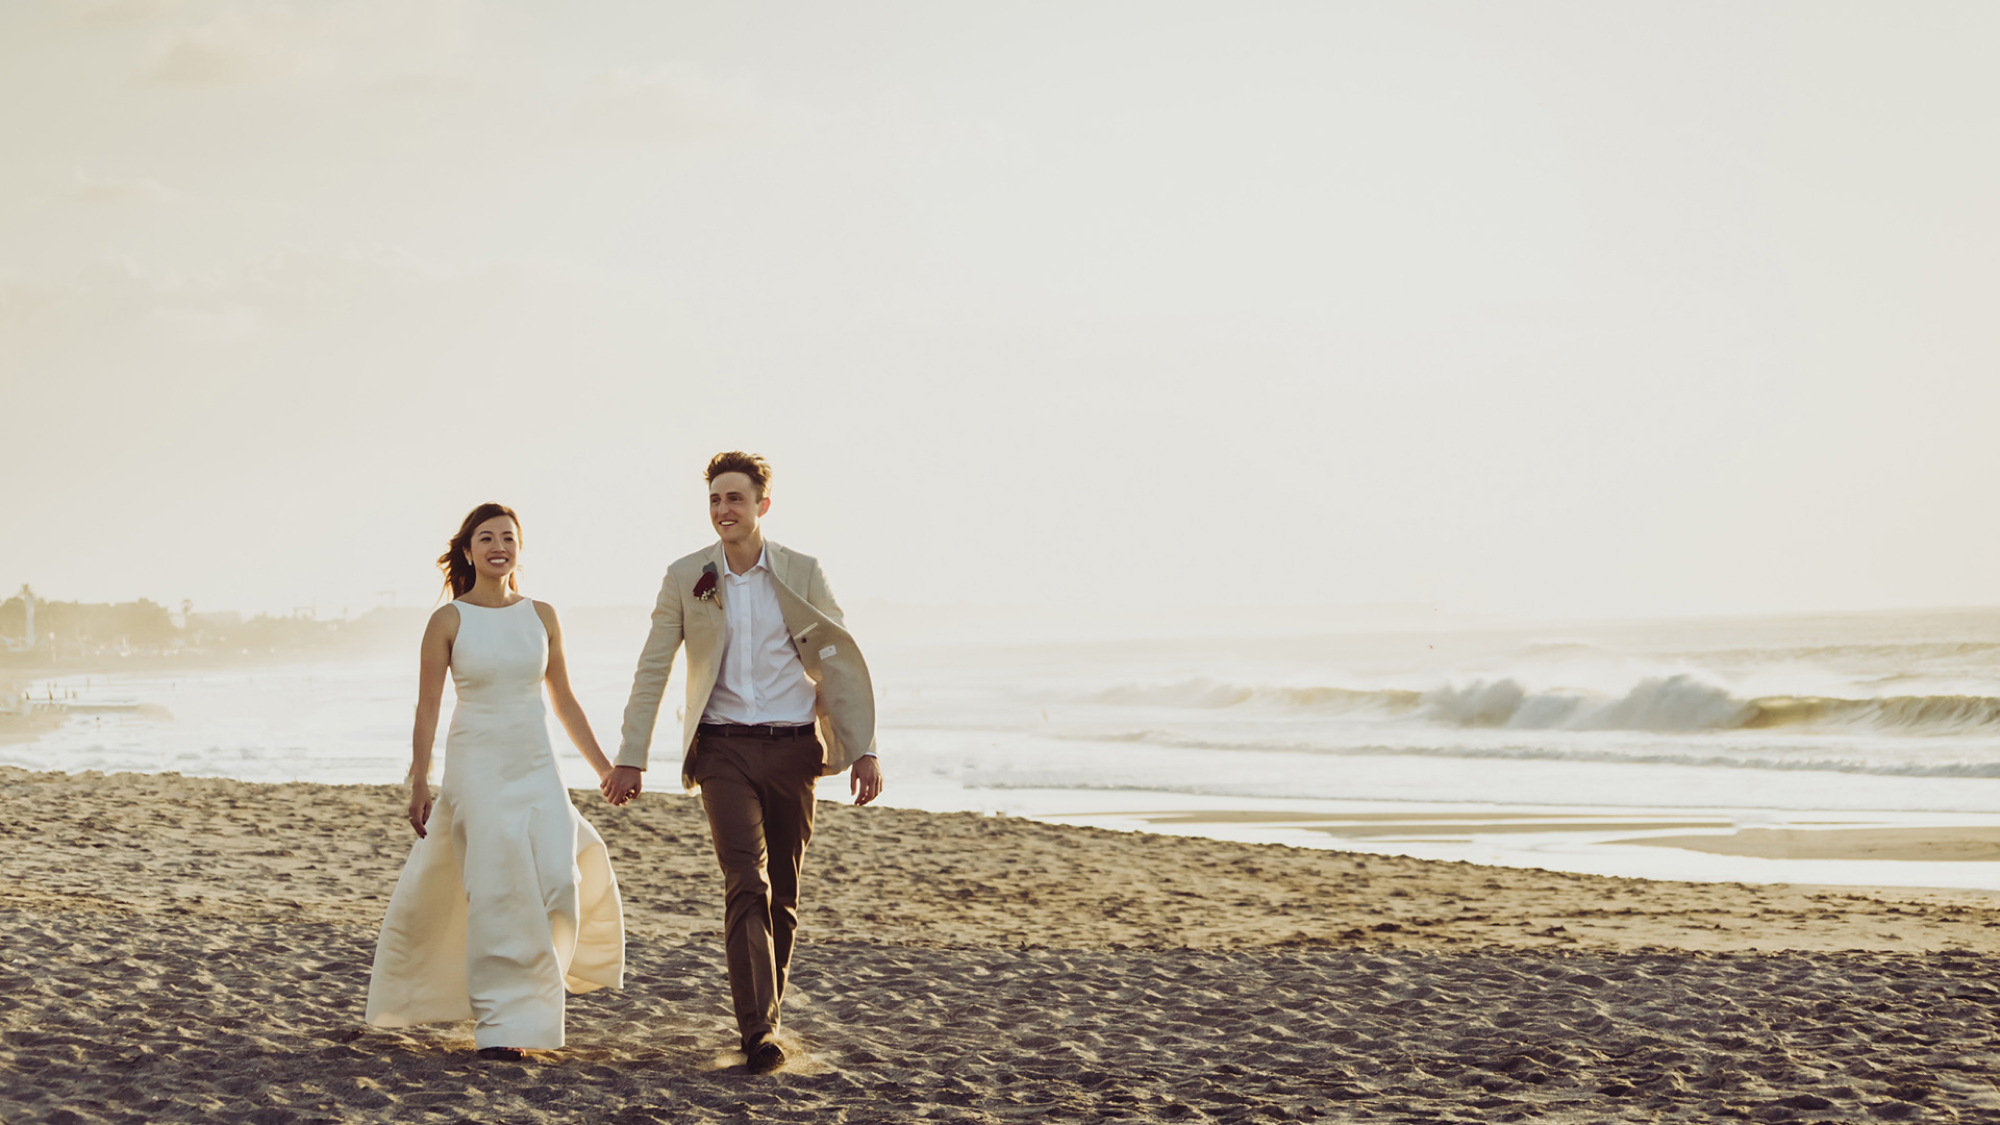 A bride and groom lookin happy and holding hands while walking on a beach